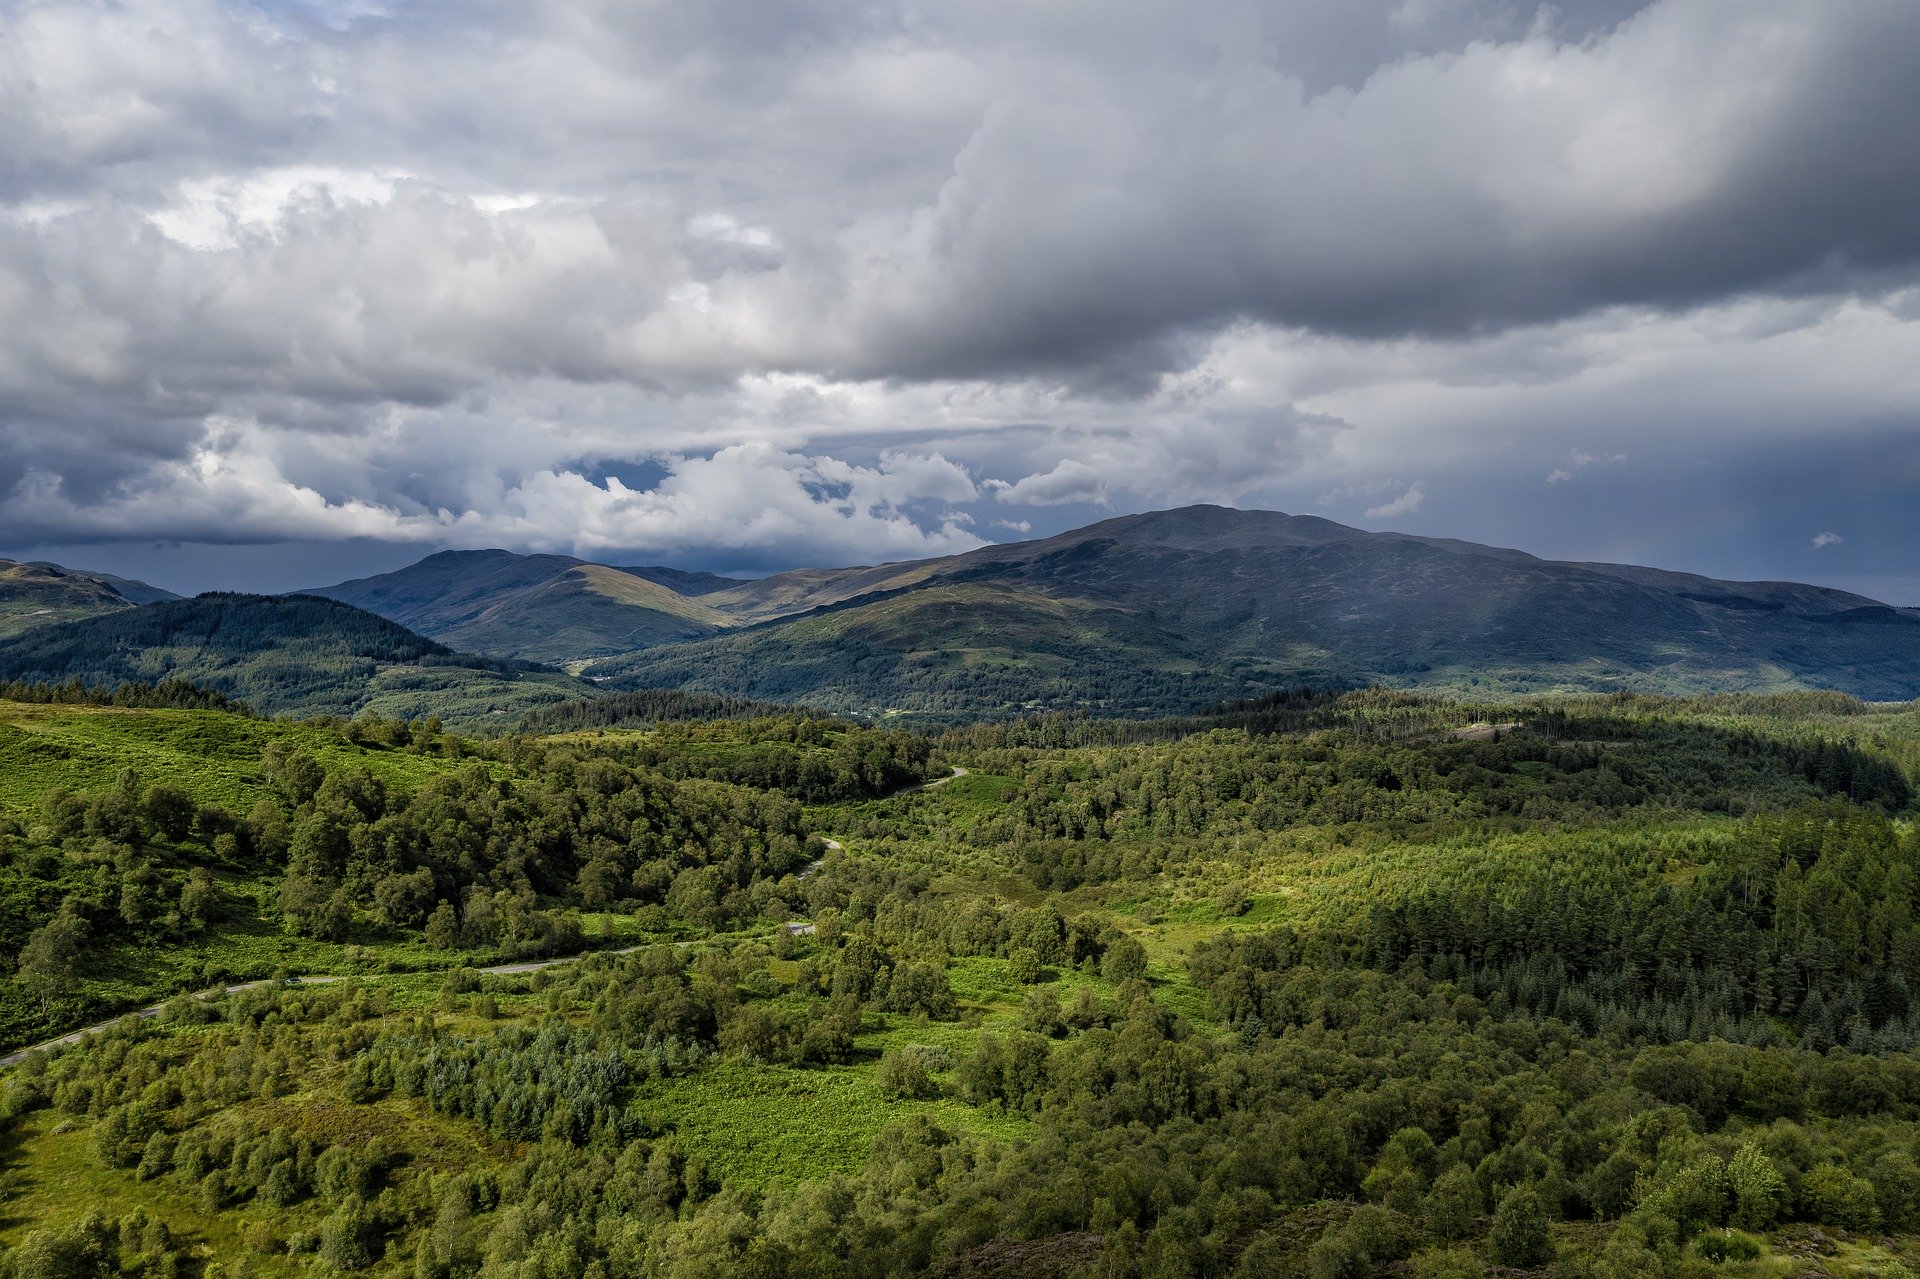 Trossachs national park, image by WolfBlur (pixabay)